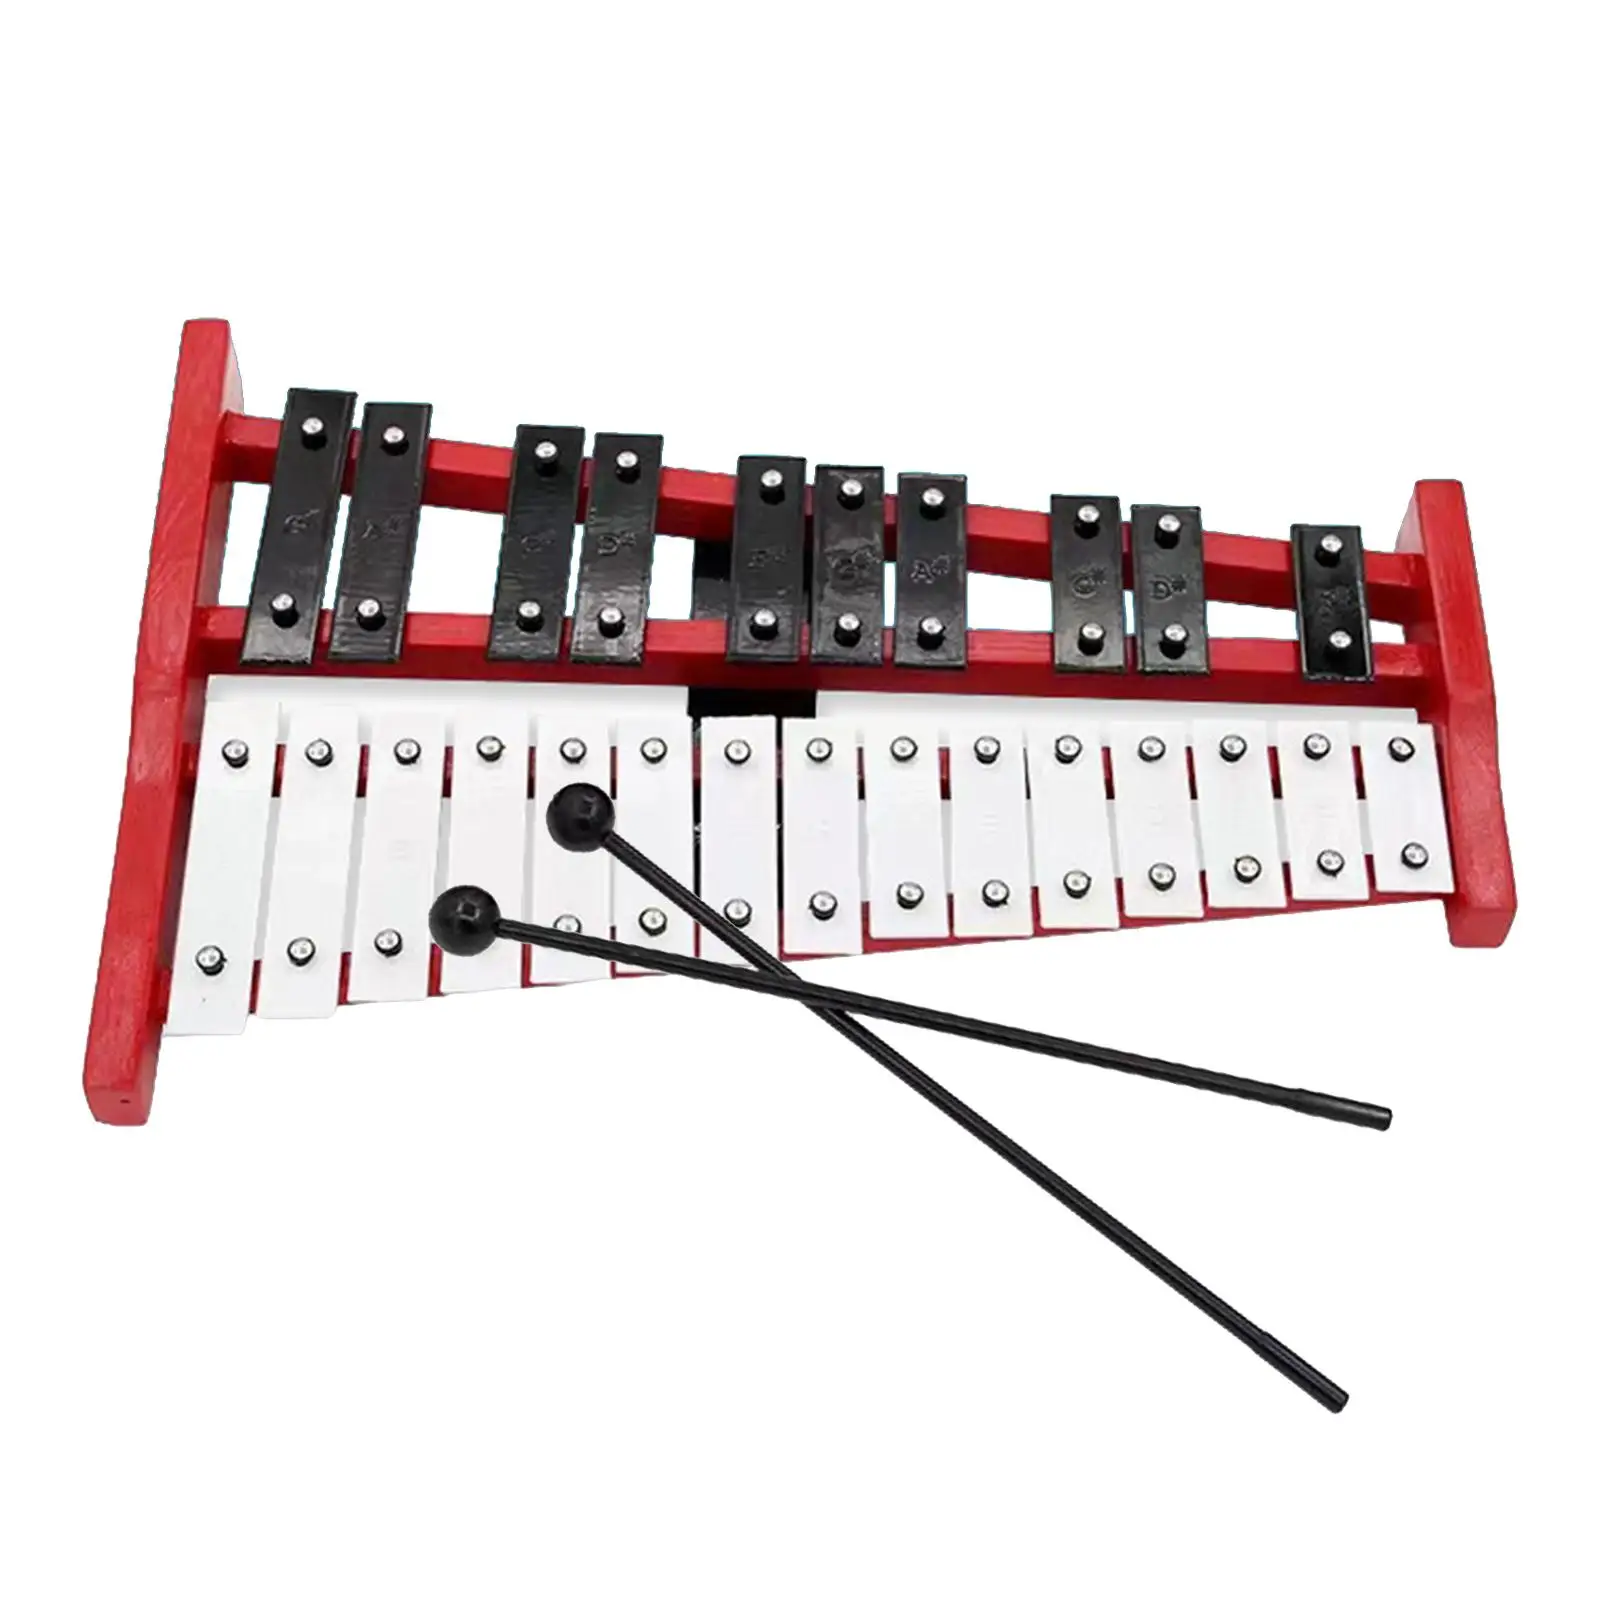 Musical Xylophone Percussion Instrument for Concert Live Performance Outside